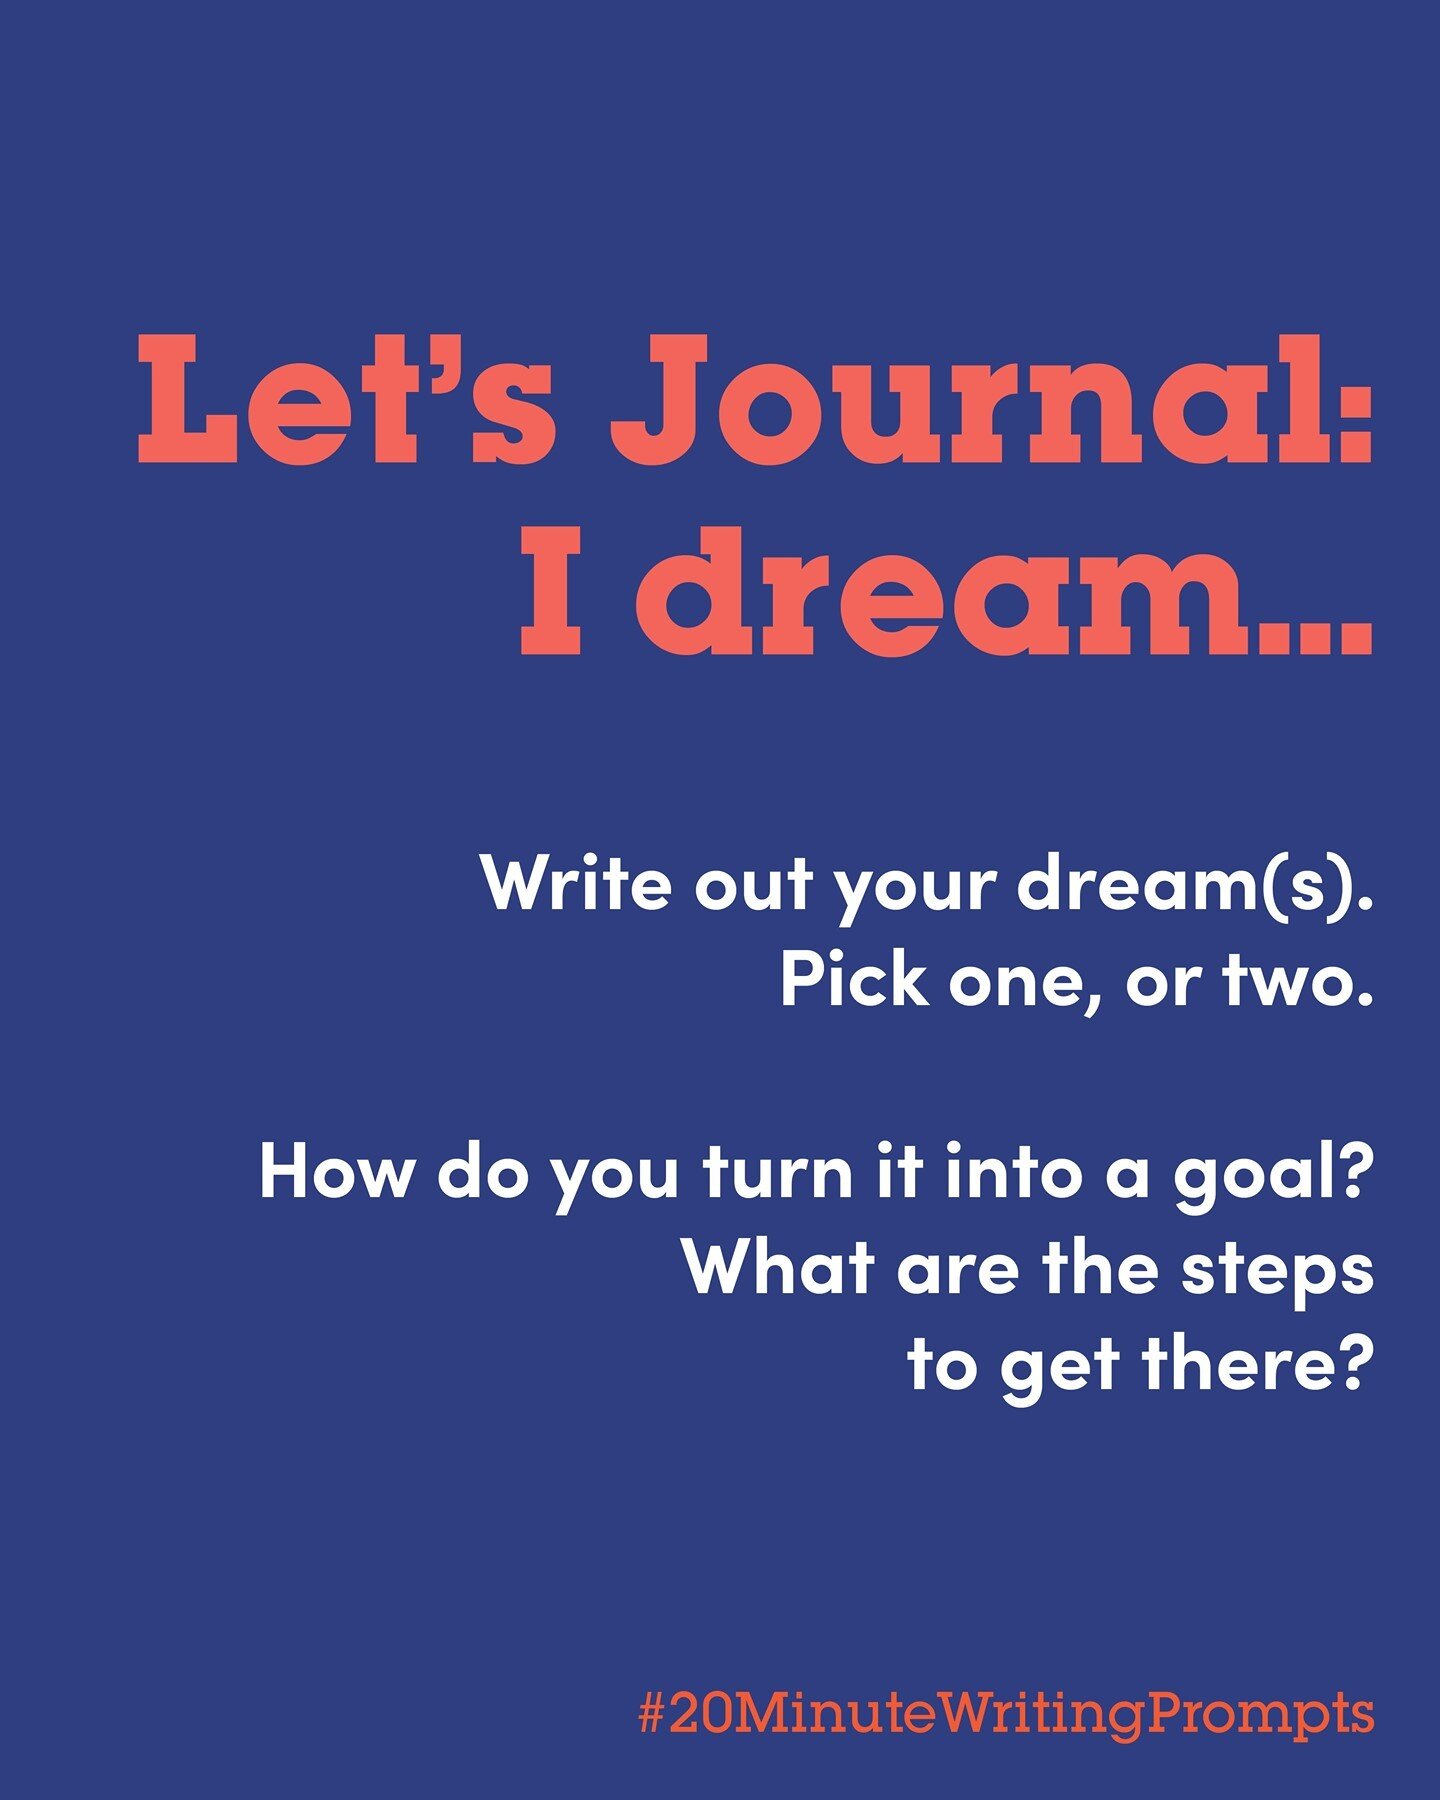 I dreamed a dream...&bull;&bull;&bull;... Twenty minutes of writing, a few times a week. That's all it takes. Let's go.⁠
⁠
⁠
⁠
⁠
⁠
#20minutewritingprompts⁠ #20MinuteWriter⁠
⠀⁠
#journaling #journalprompts⁠
#aspiringwriter #writingpractice #writerscomm